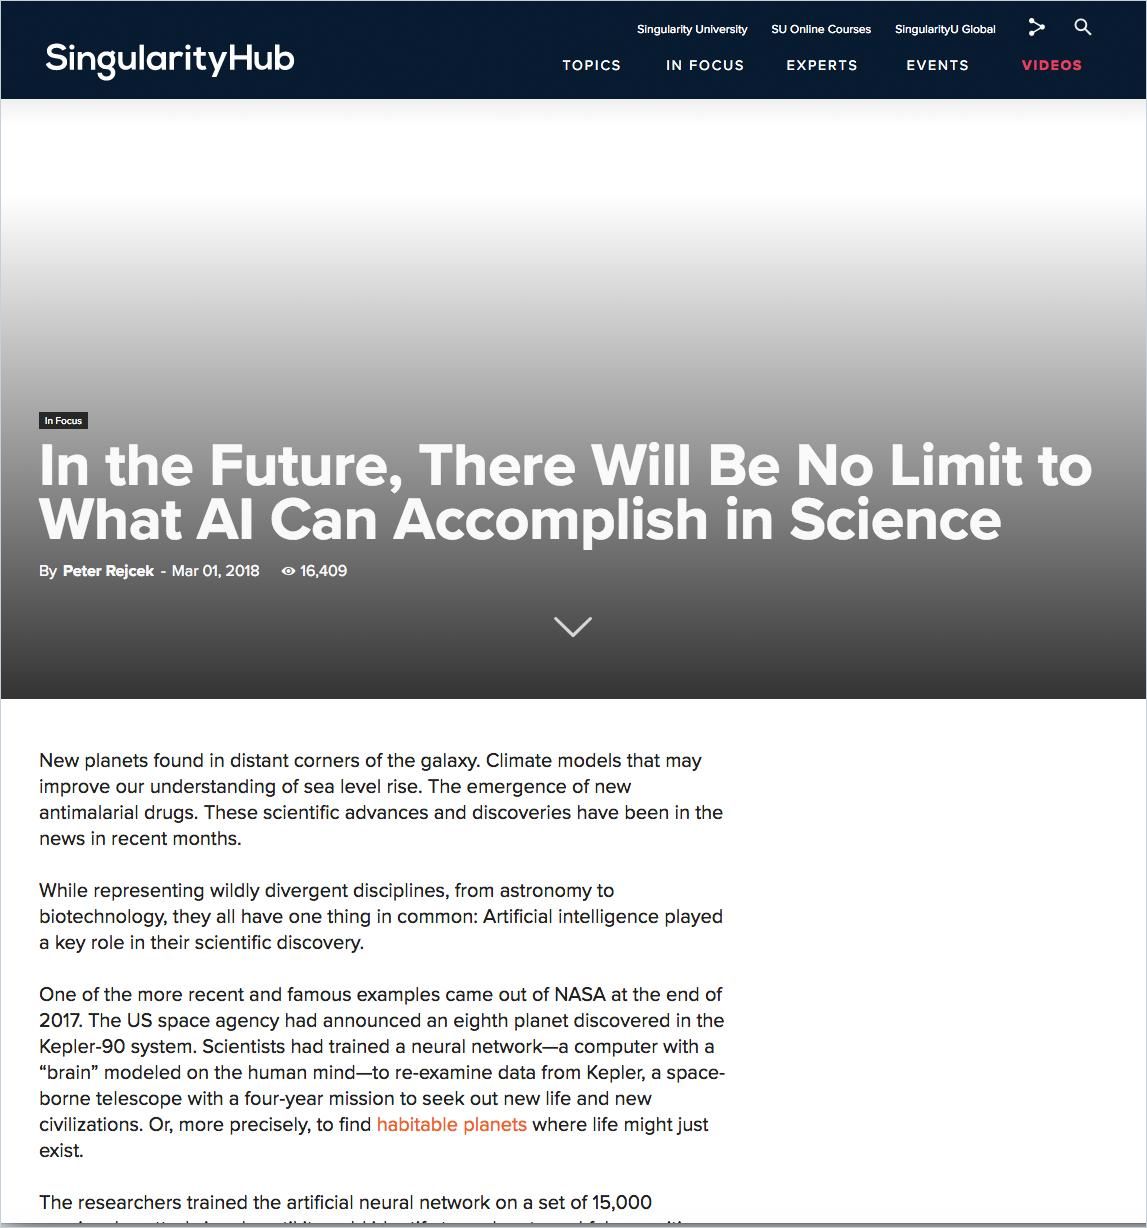 Image of: In the Future, There Will Be No Limit to What AI Can Accomplish in Science